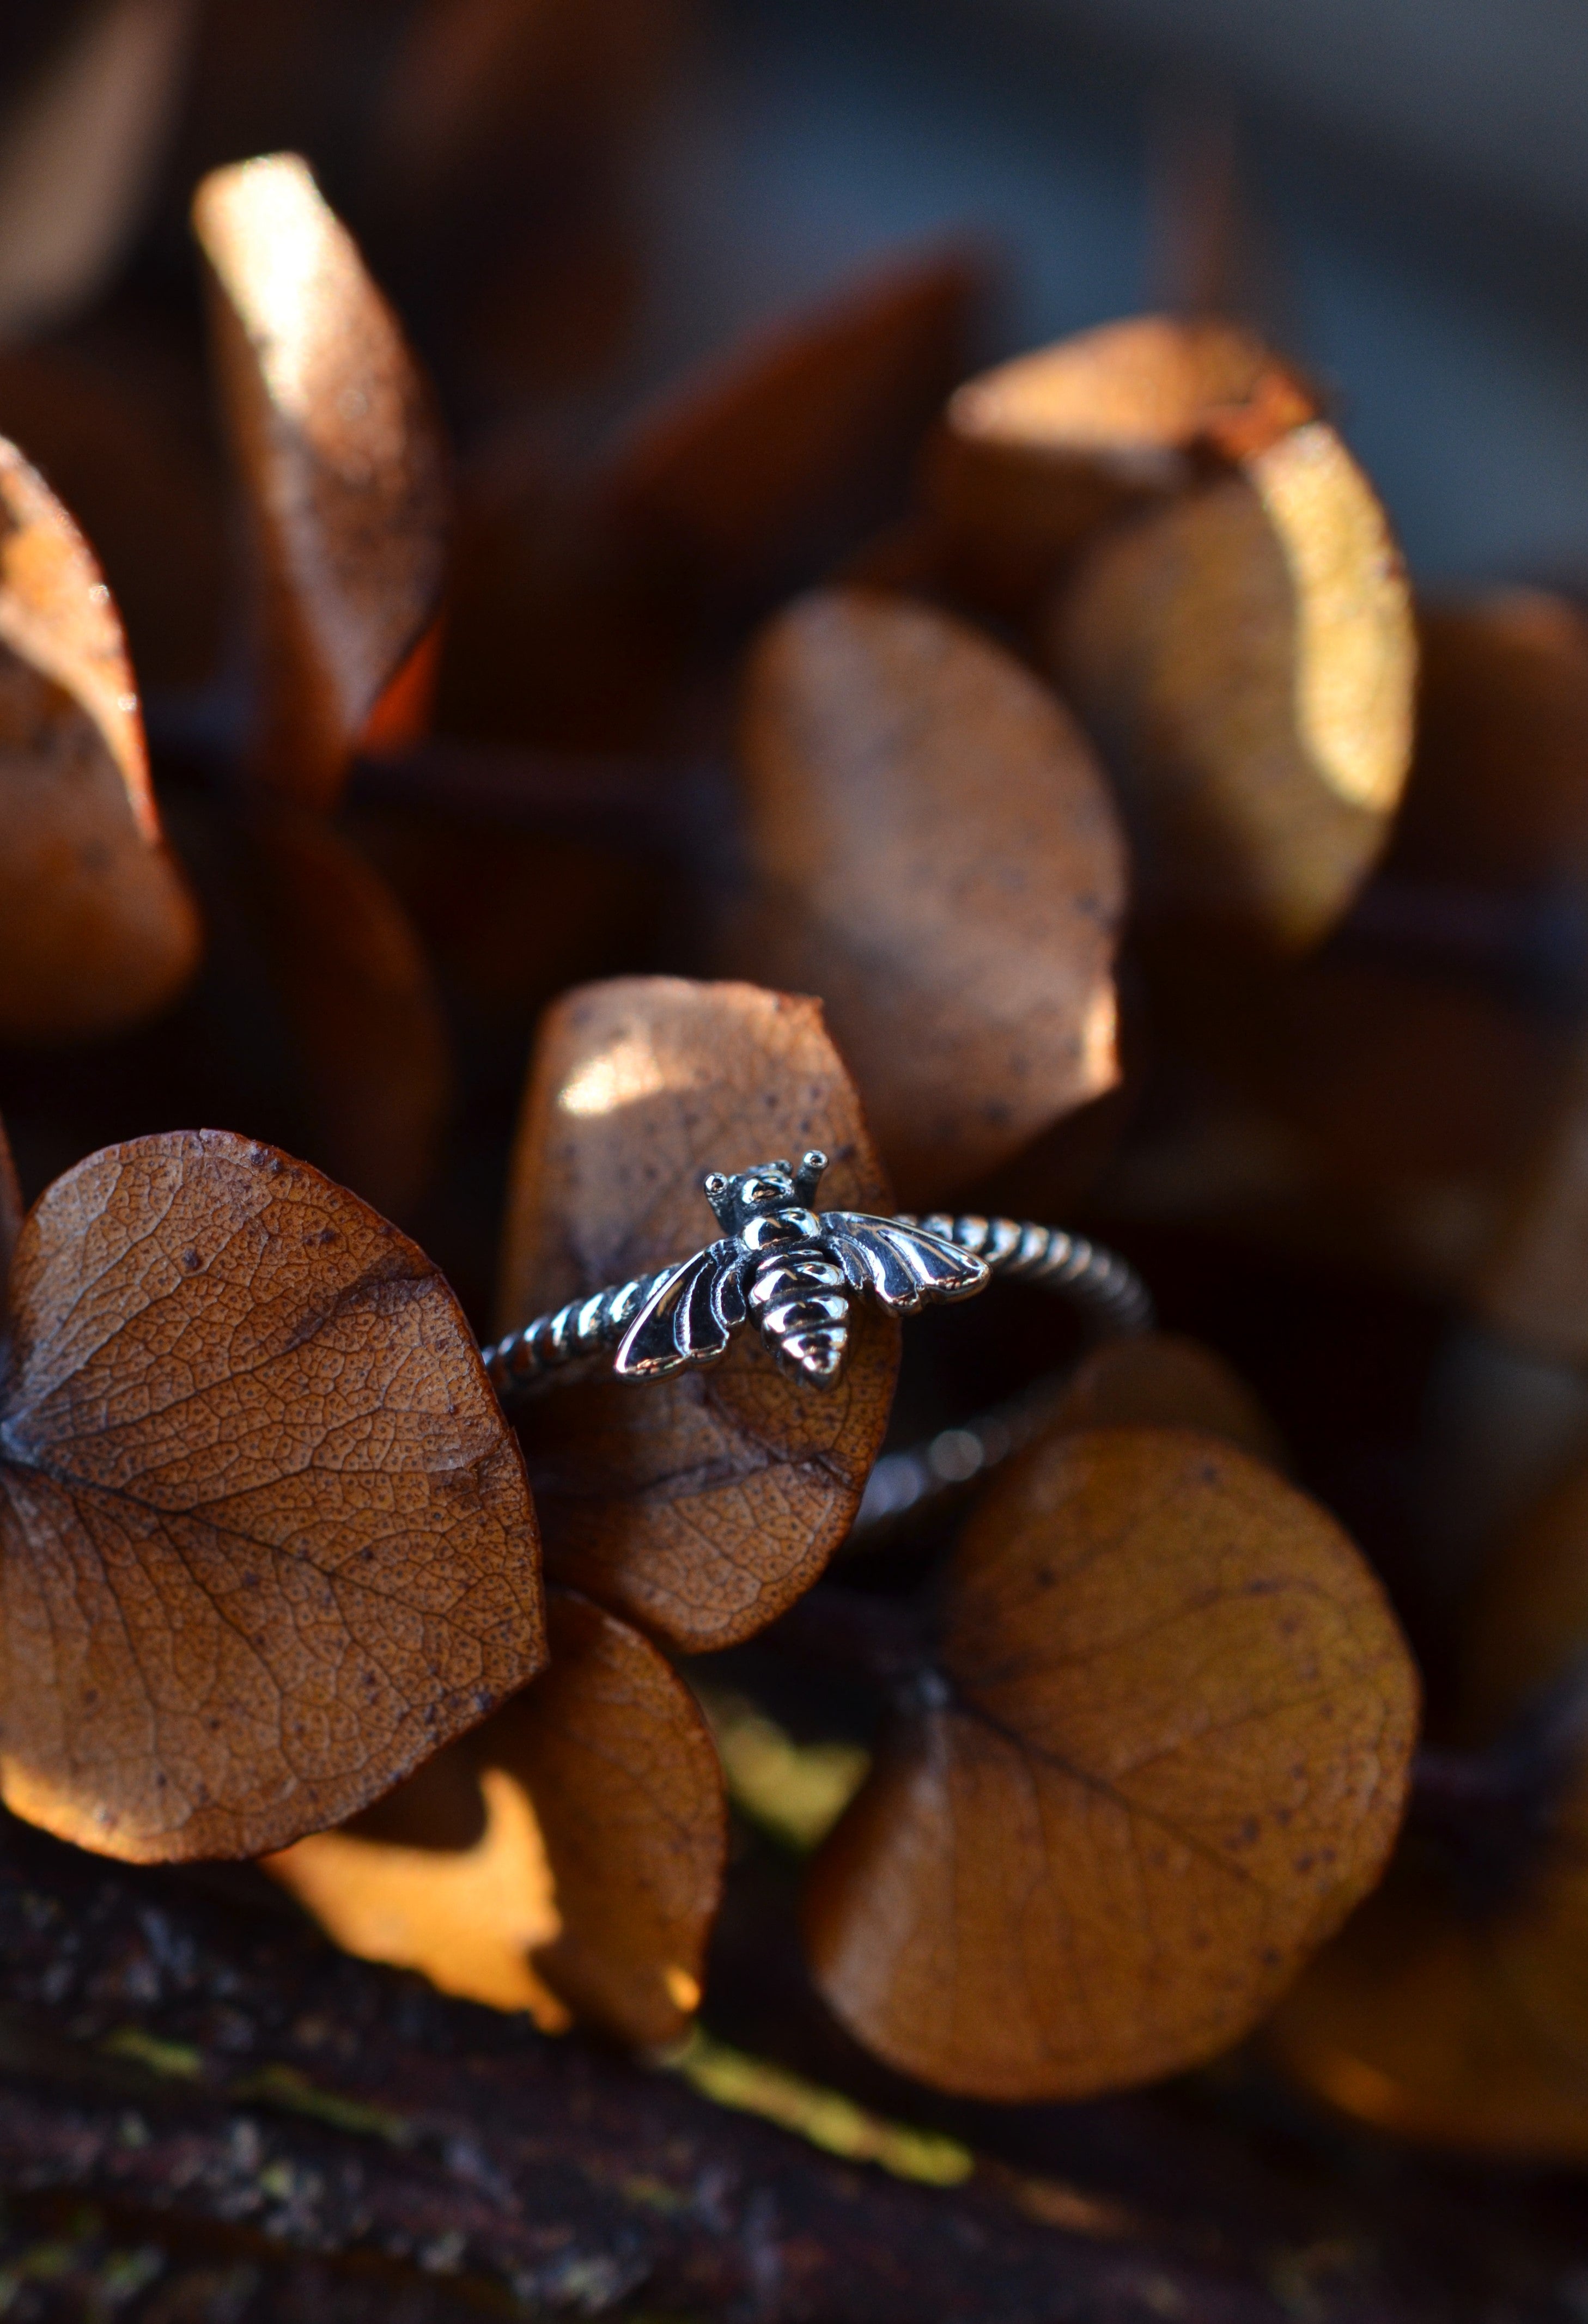 Dainty Bee Ring - Sterling Silver - SIZES 5-10!